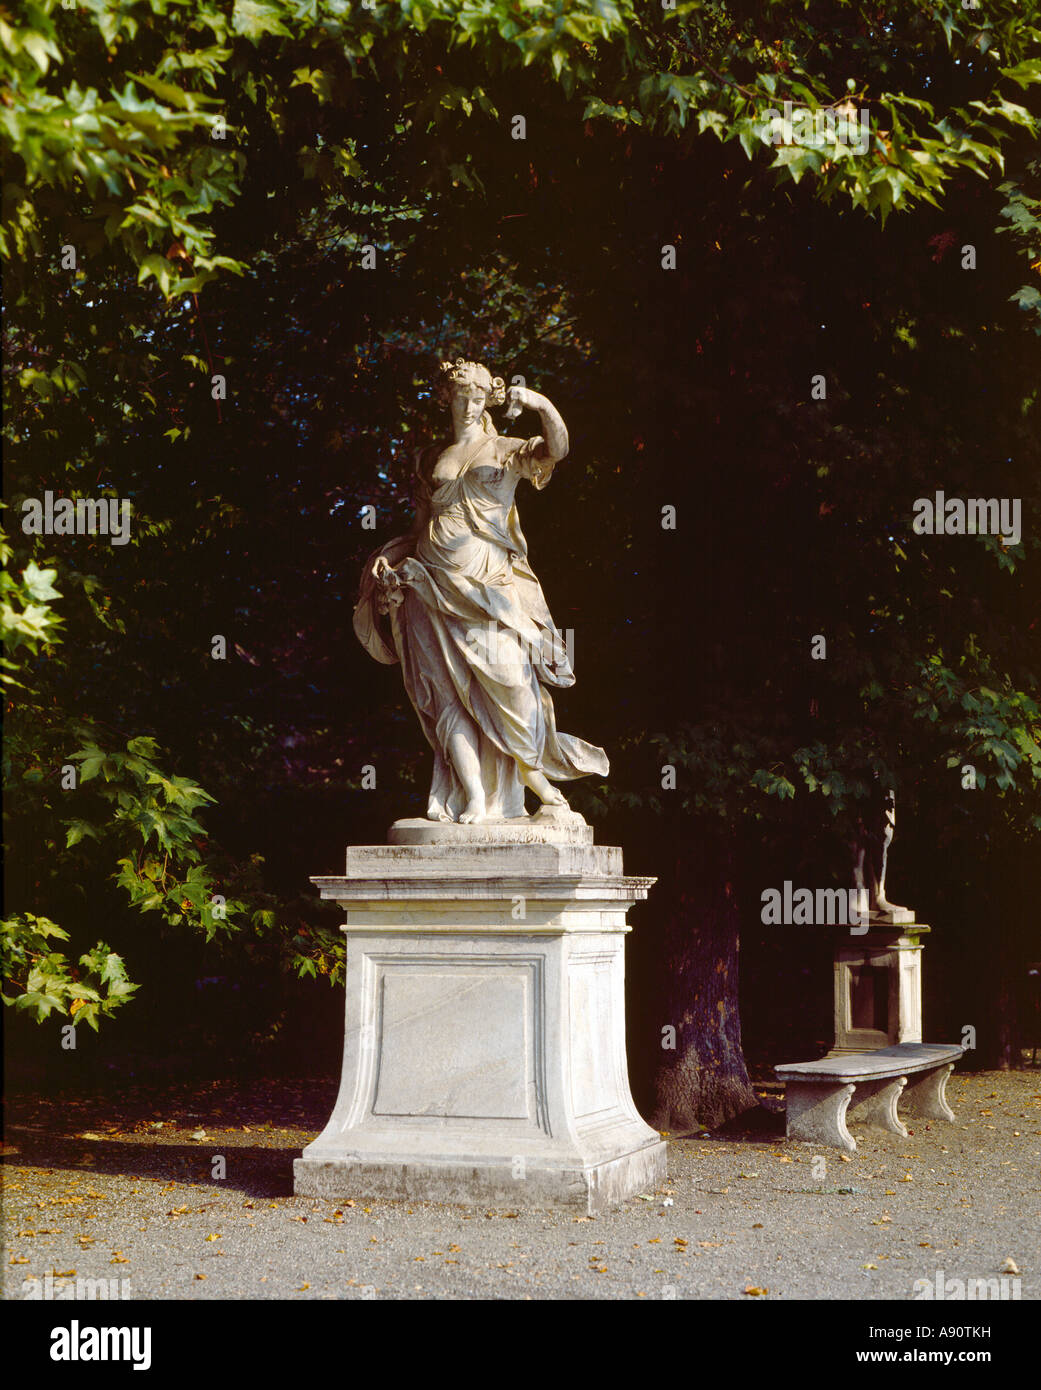 Statue of Flora, goddess of Spring at the Palazzo Reale, Turin, Italy. The gardens were laid out by the French garden designer Andre Le Nôtre in 1697 Stock Photo